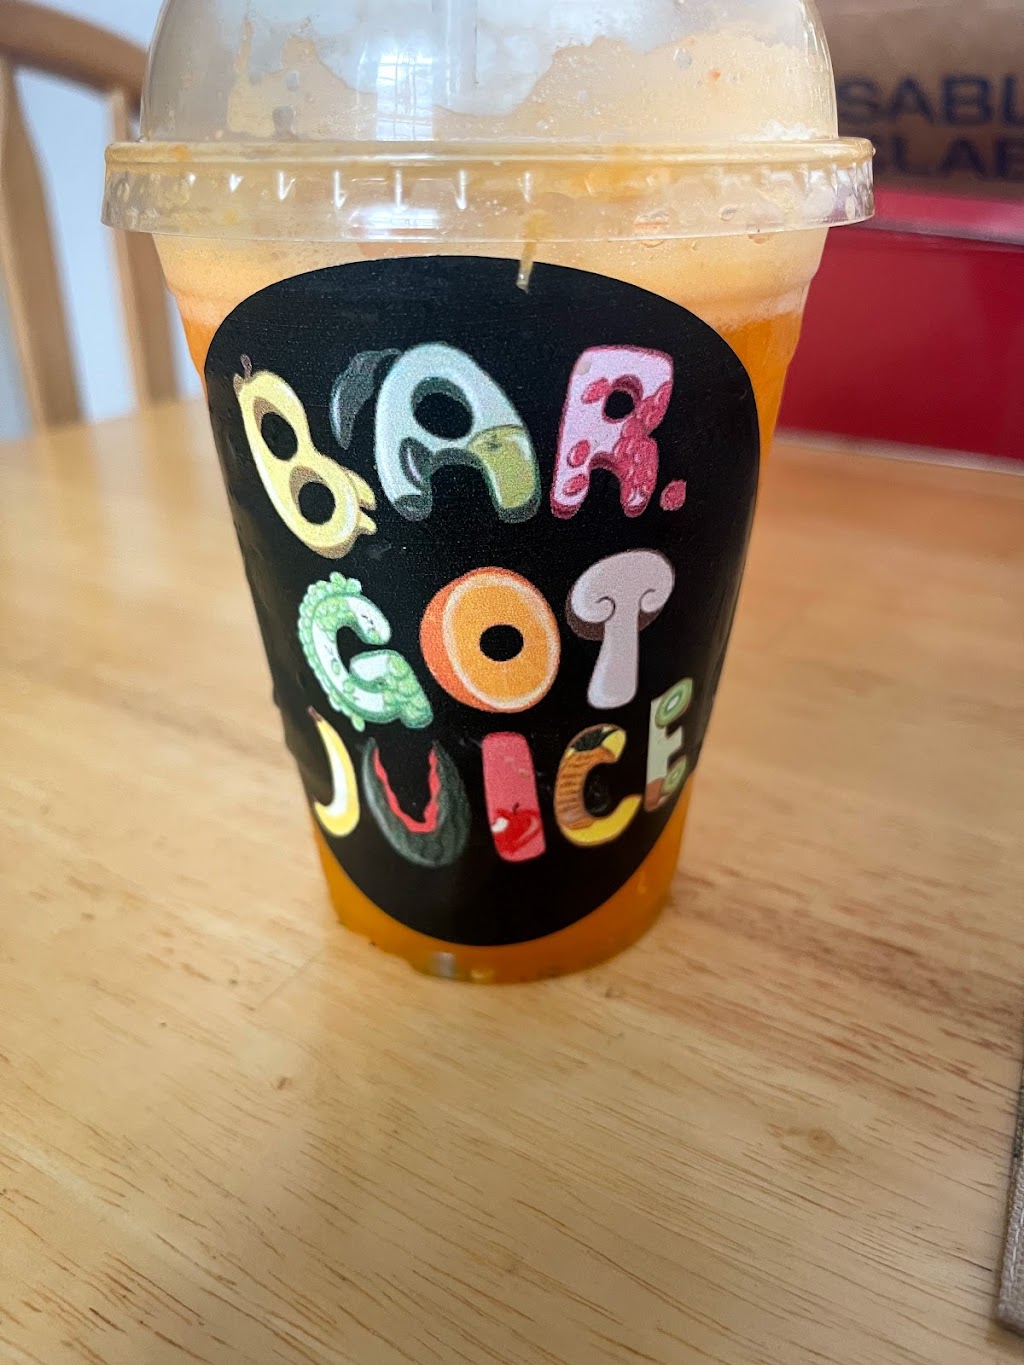 Bar got juice | restaurant | 204-11 Hollis Ave, Queens, NY 11412, USA | 9175135903 OR +1 917-513-5903